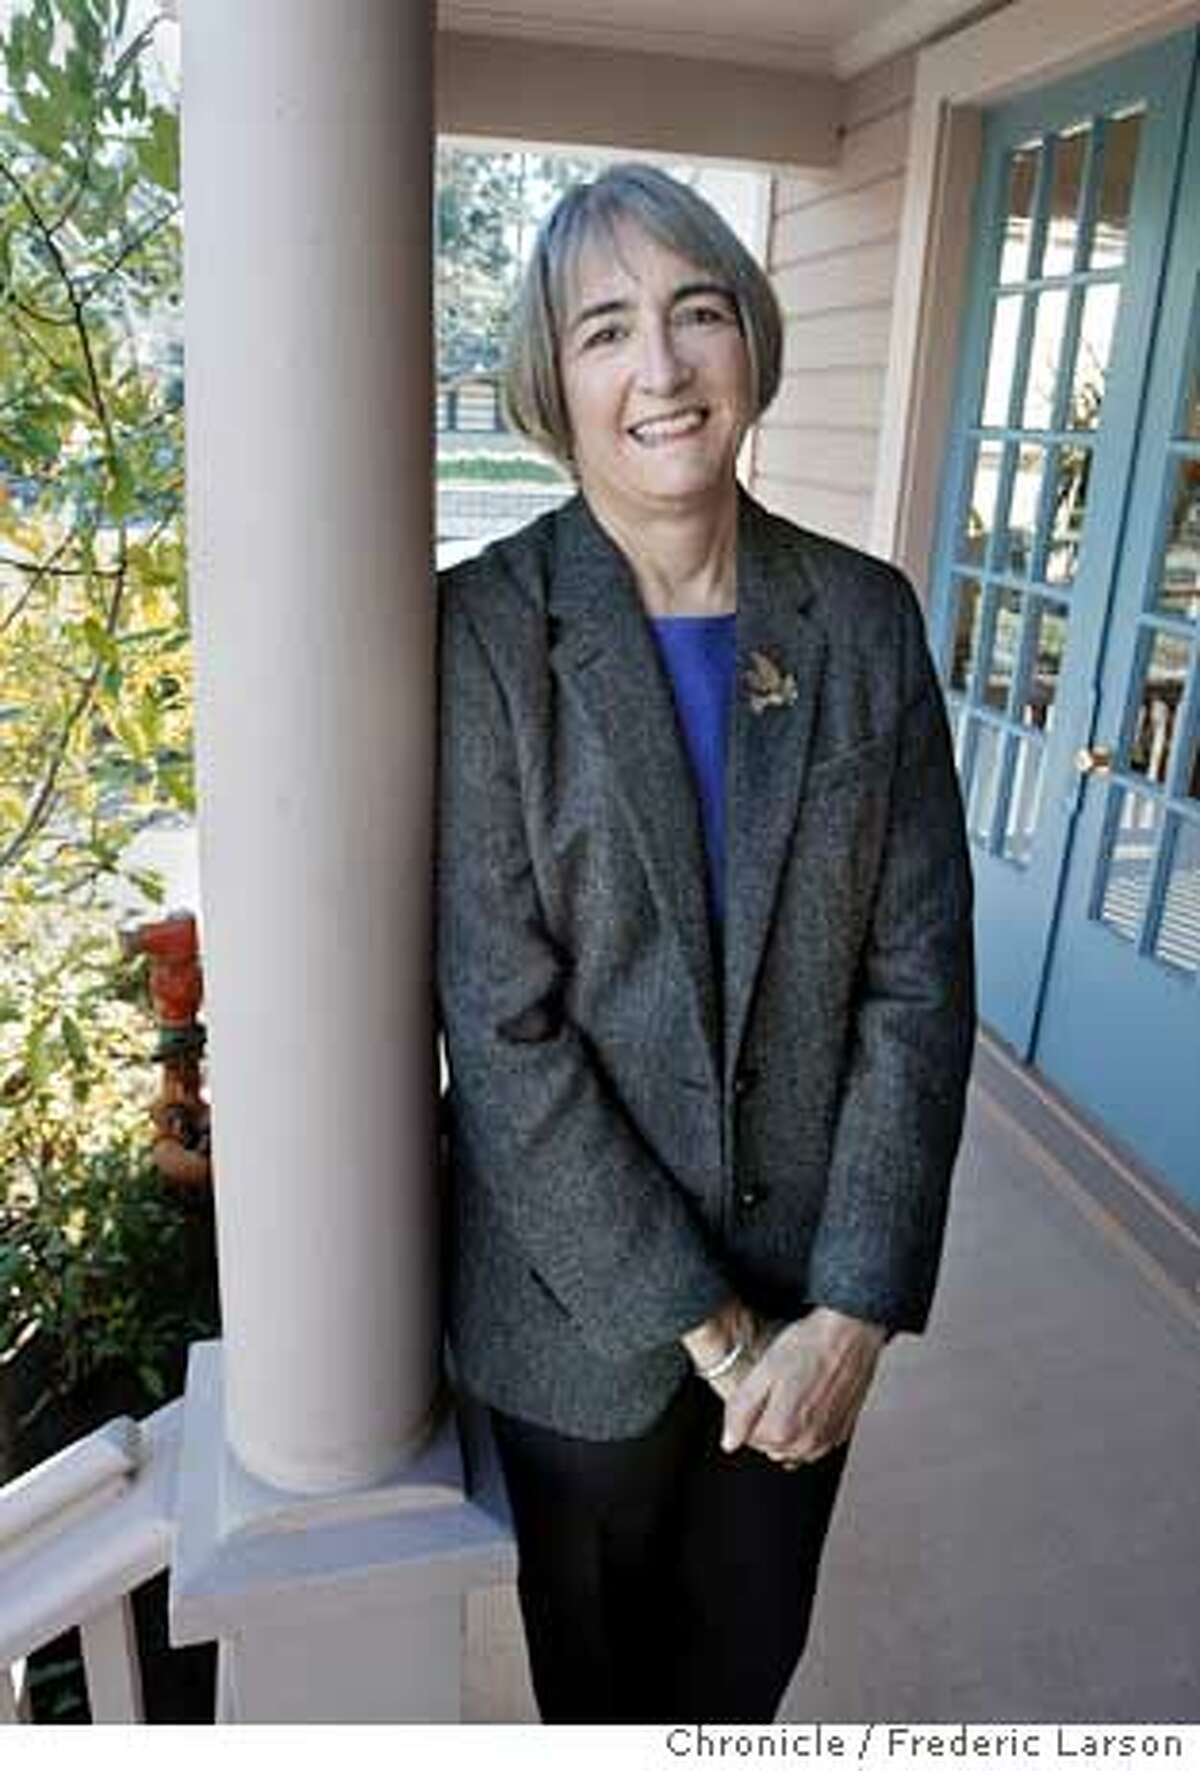 ; Susan Packard Orr, a daughter of the co-founder of Hewlitt Packard, heads a software firm, called Telosa, that makes software marketed primarily to non-profit charities and arts organizations and other community groups. She is a former HP board member and chairs the board of the Packard Foundations, which gives away scads of money to worthy causes. SHe is the Spotlight profile for the Wednesday, Dec. 17 Business section. We're interviewing her in her Telosa office, so we can get shots of her in her natural habitat. The interview will center on both her philantropic and entrepreneurial activities on 12/15/03, in Palo Alto, CA. City:� . FREDERIC LARSON/The Chronicle;